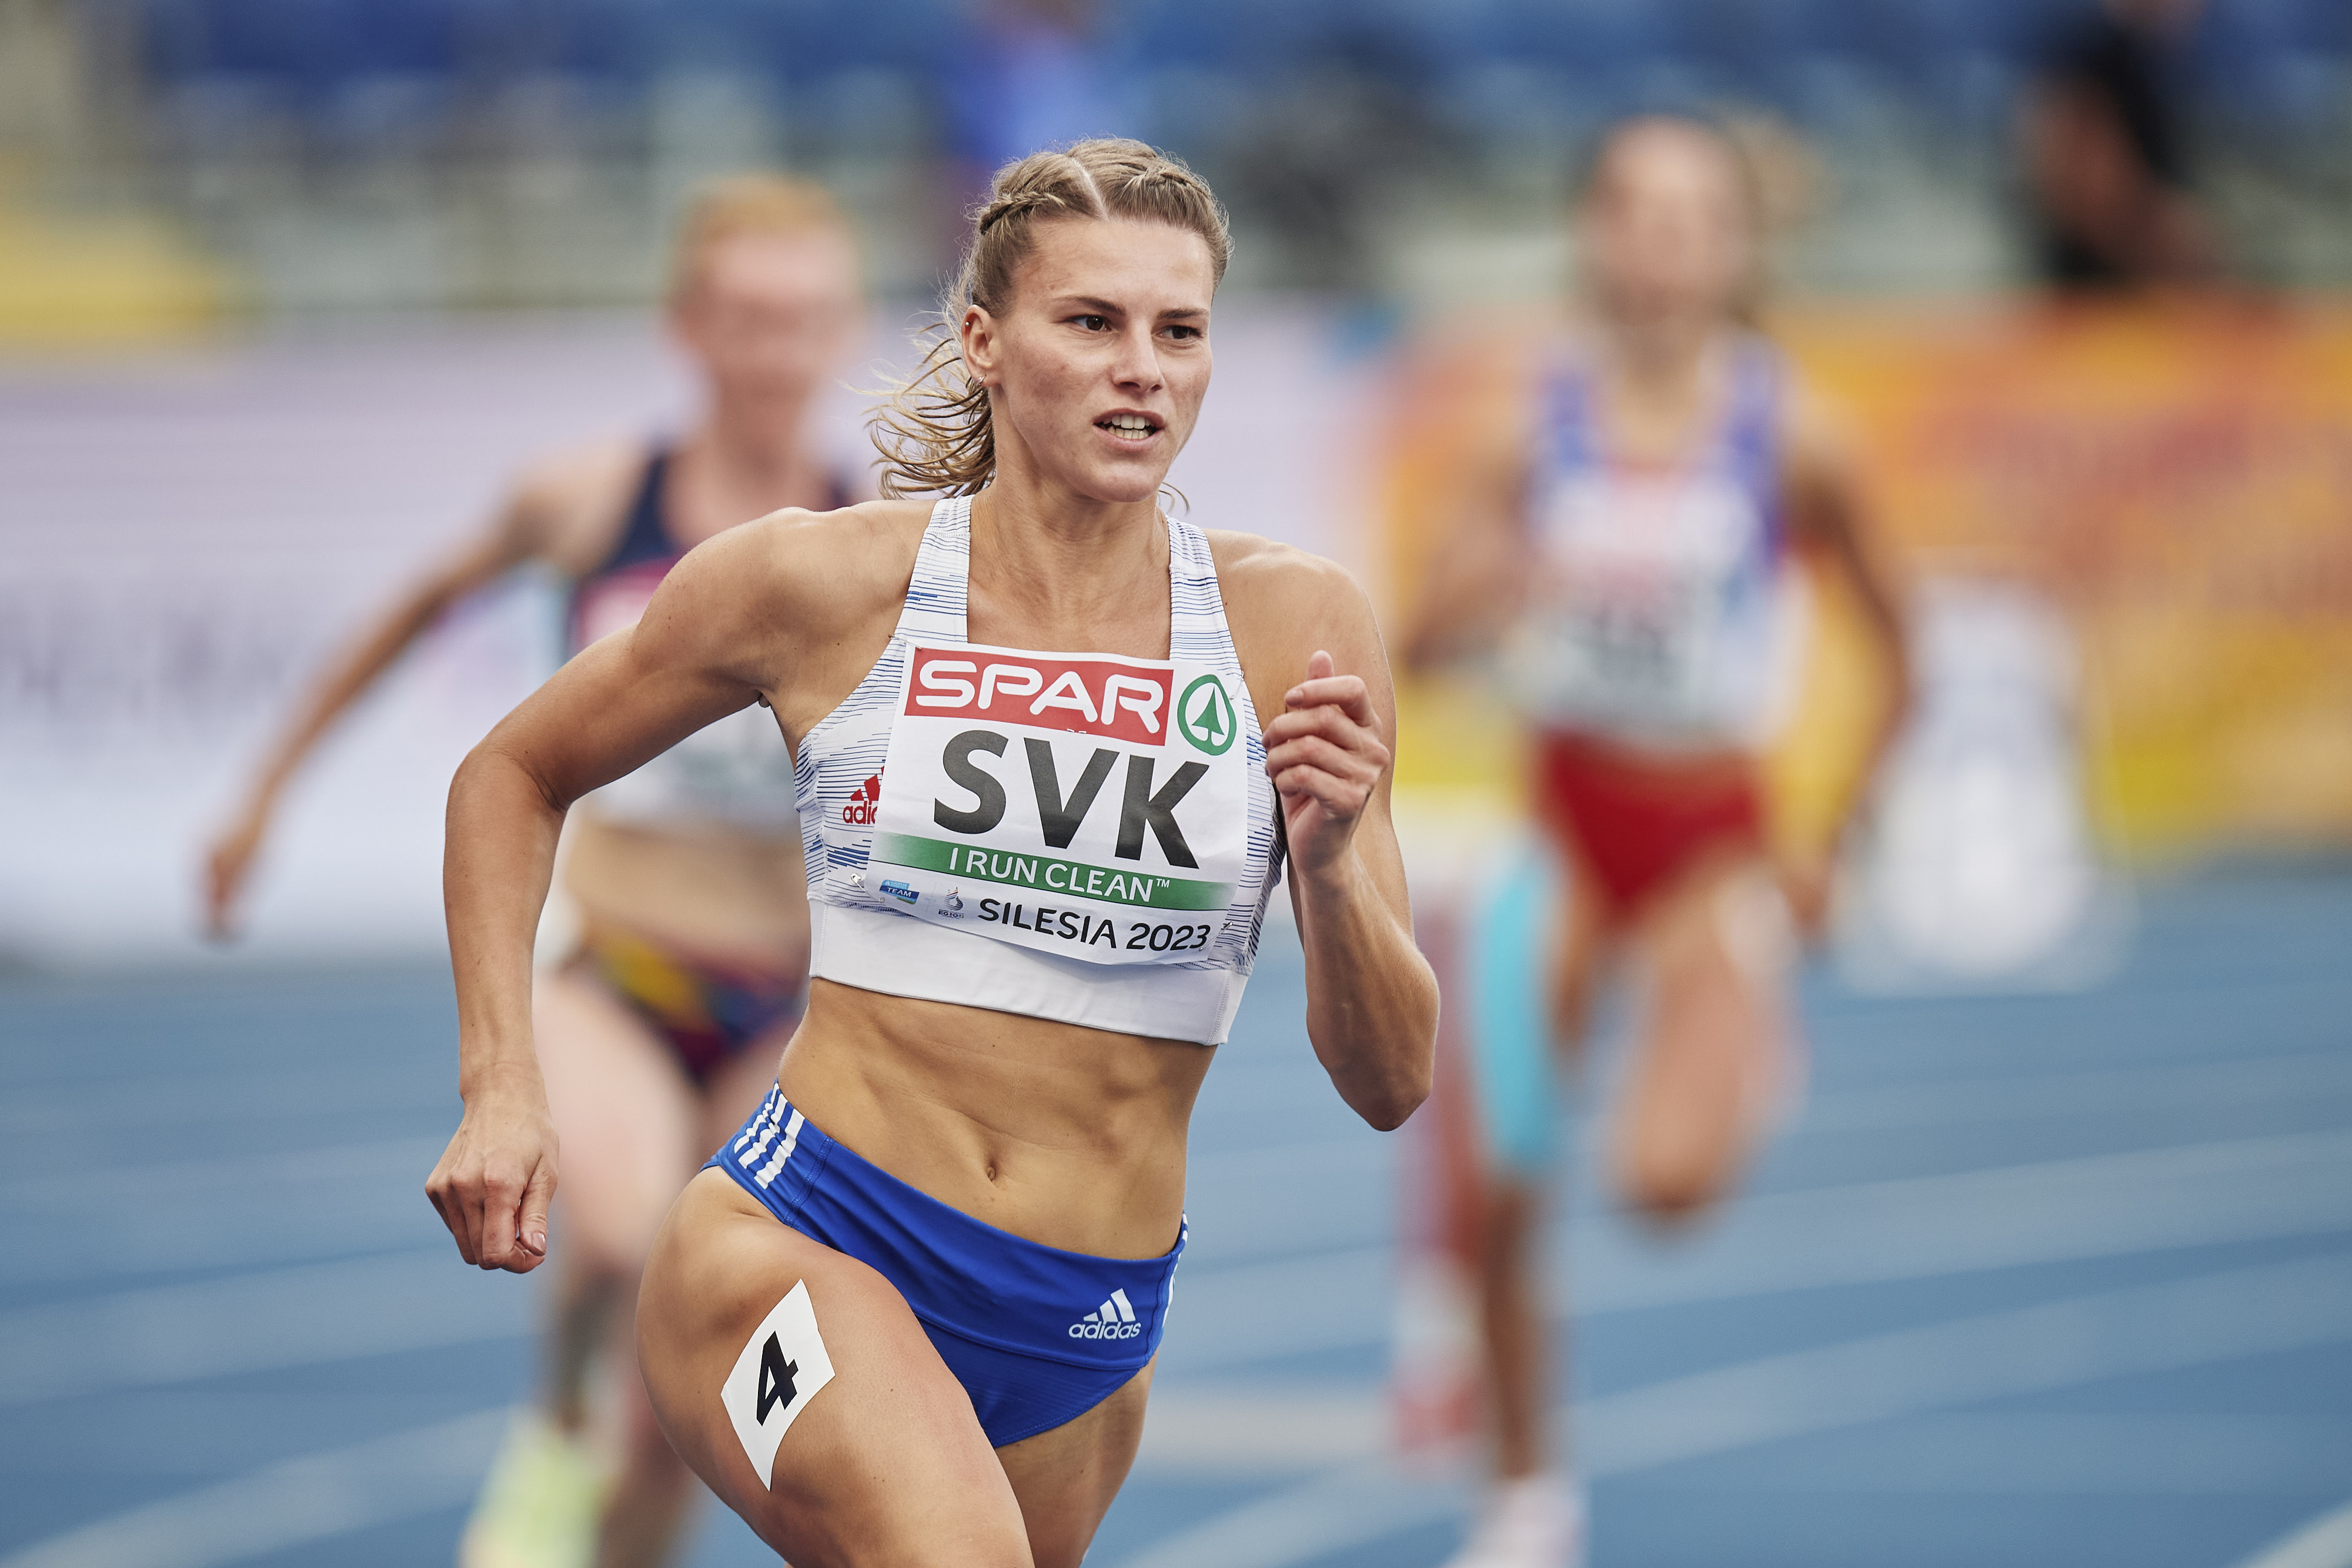 Ireland and Hungary in the lead after the second day of the European Athletics Team Championships Silesia 2023